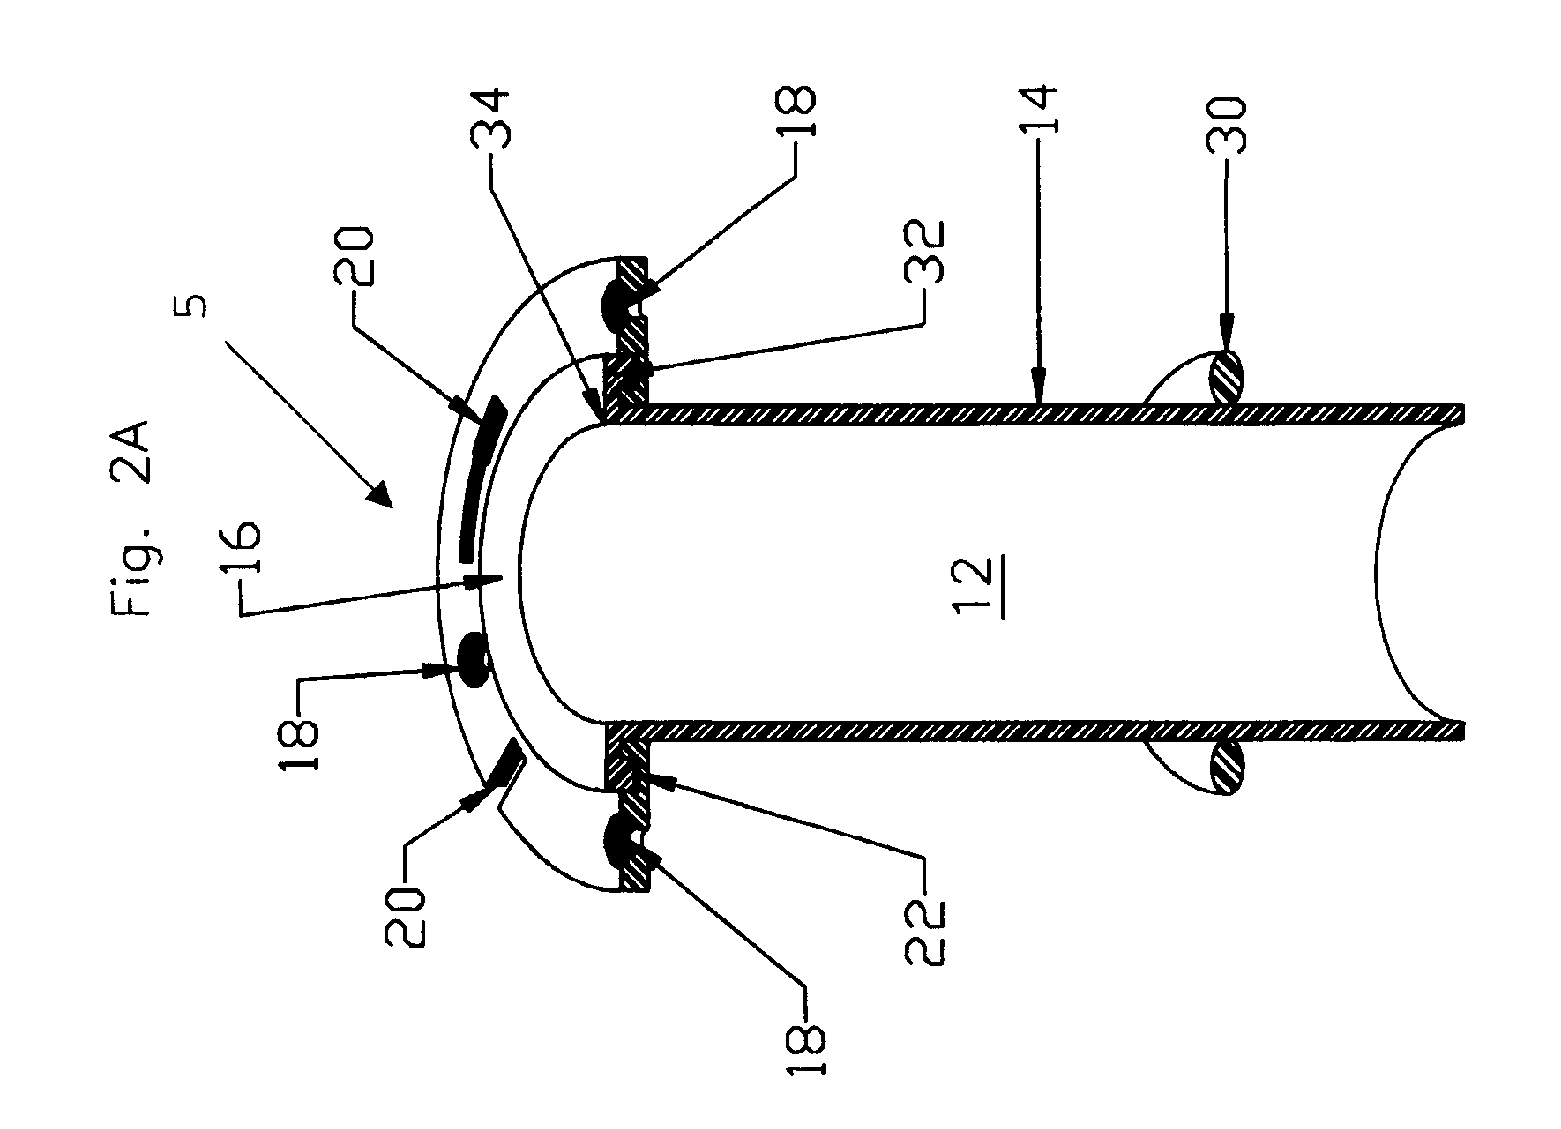 Flexible sleeve for connection to a plumbing fixture